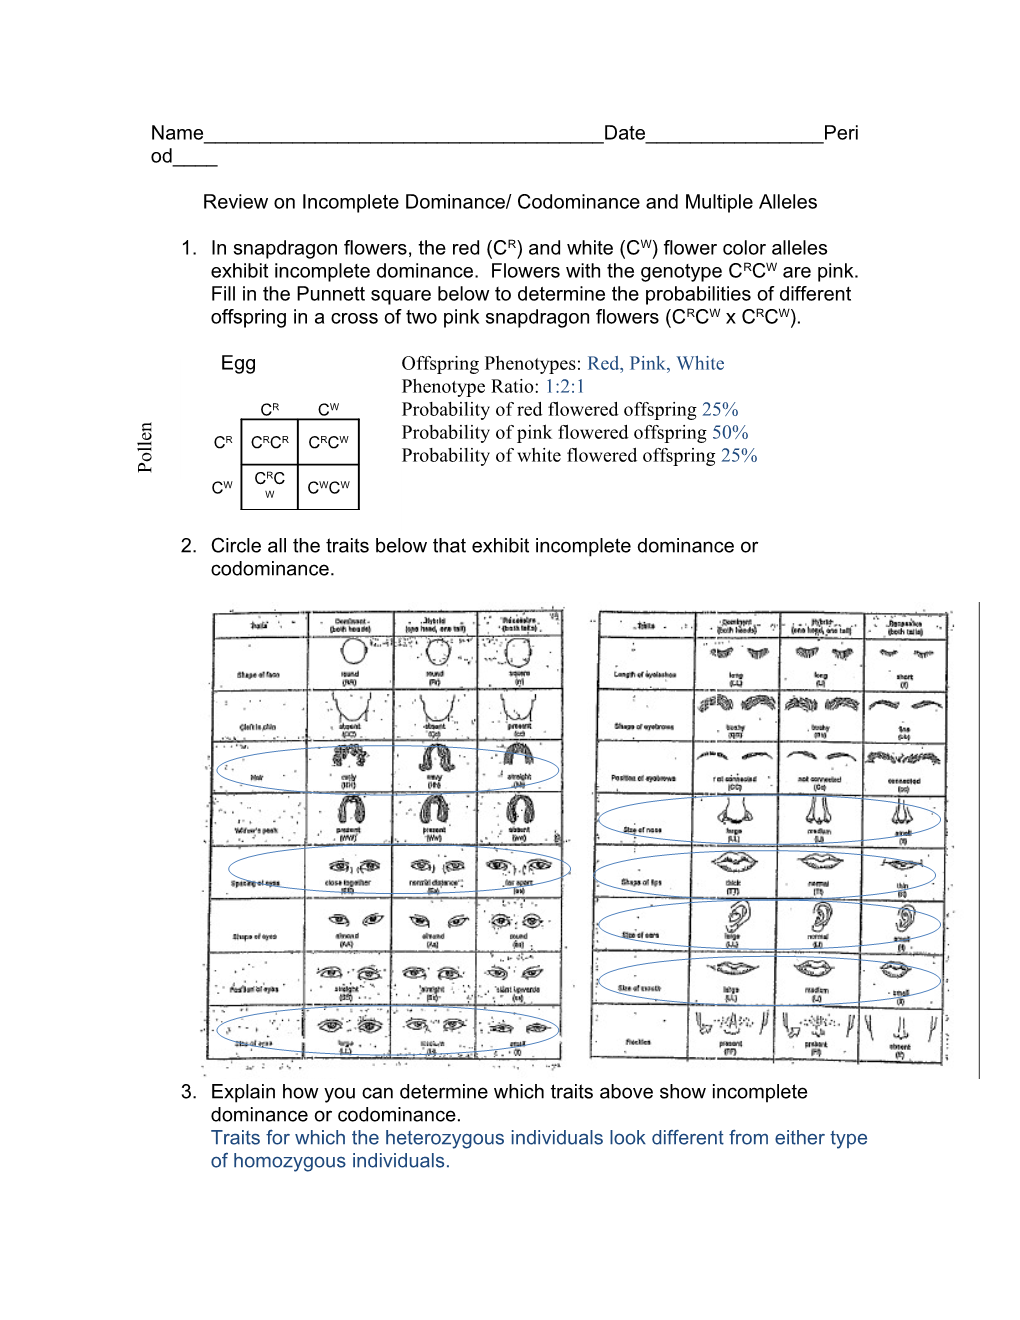 Review on Incomplete Dominance/ Codominance and Multiple Alleles